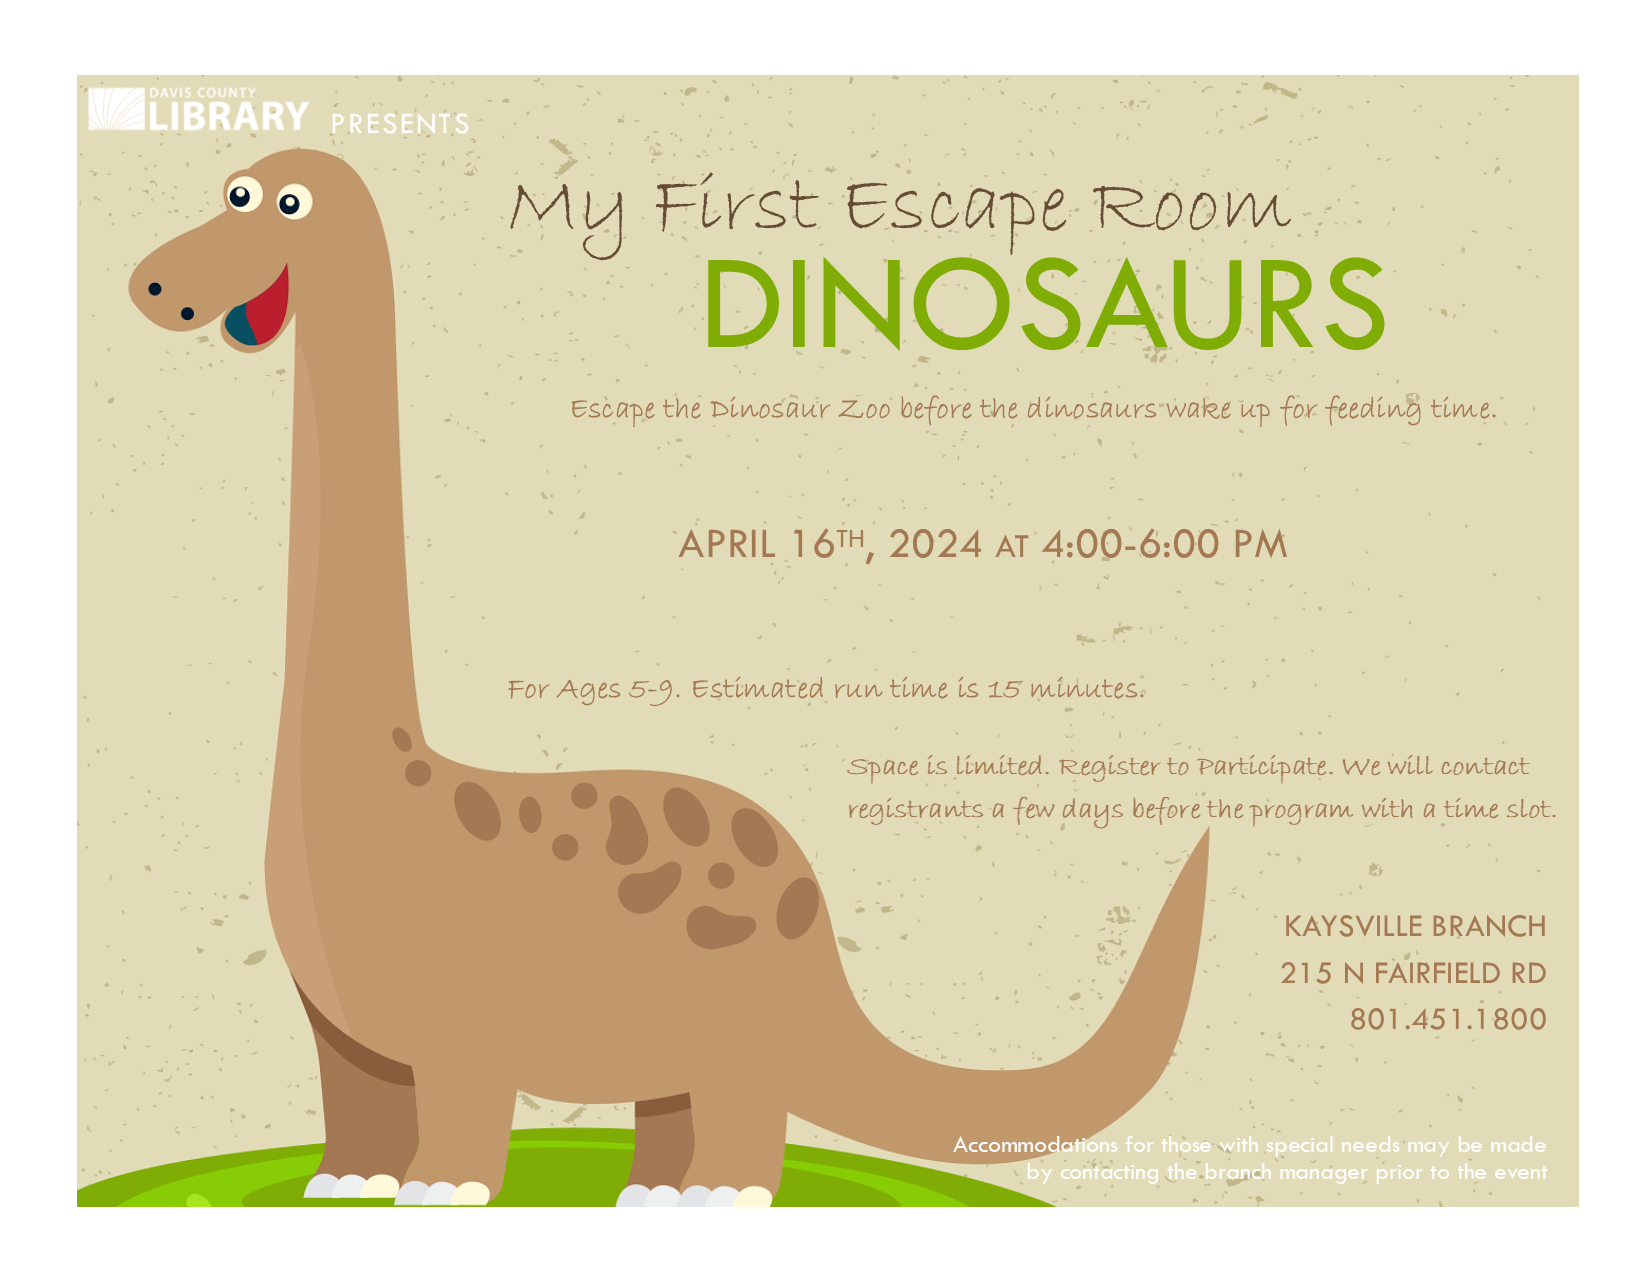 My First Escape Room - Dinosaurs - for Ages 5-9. Kaysville Branch. April 16 4-6 pm. Register to Participate.